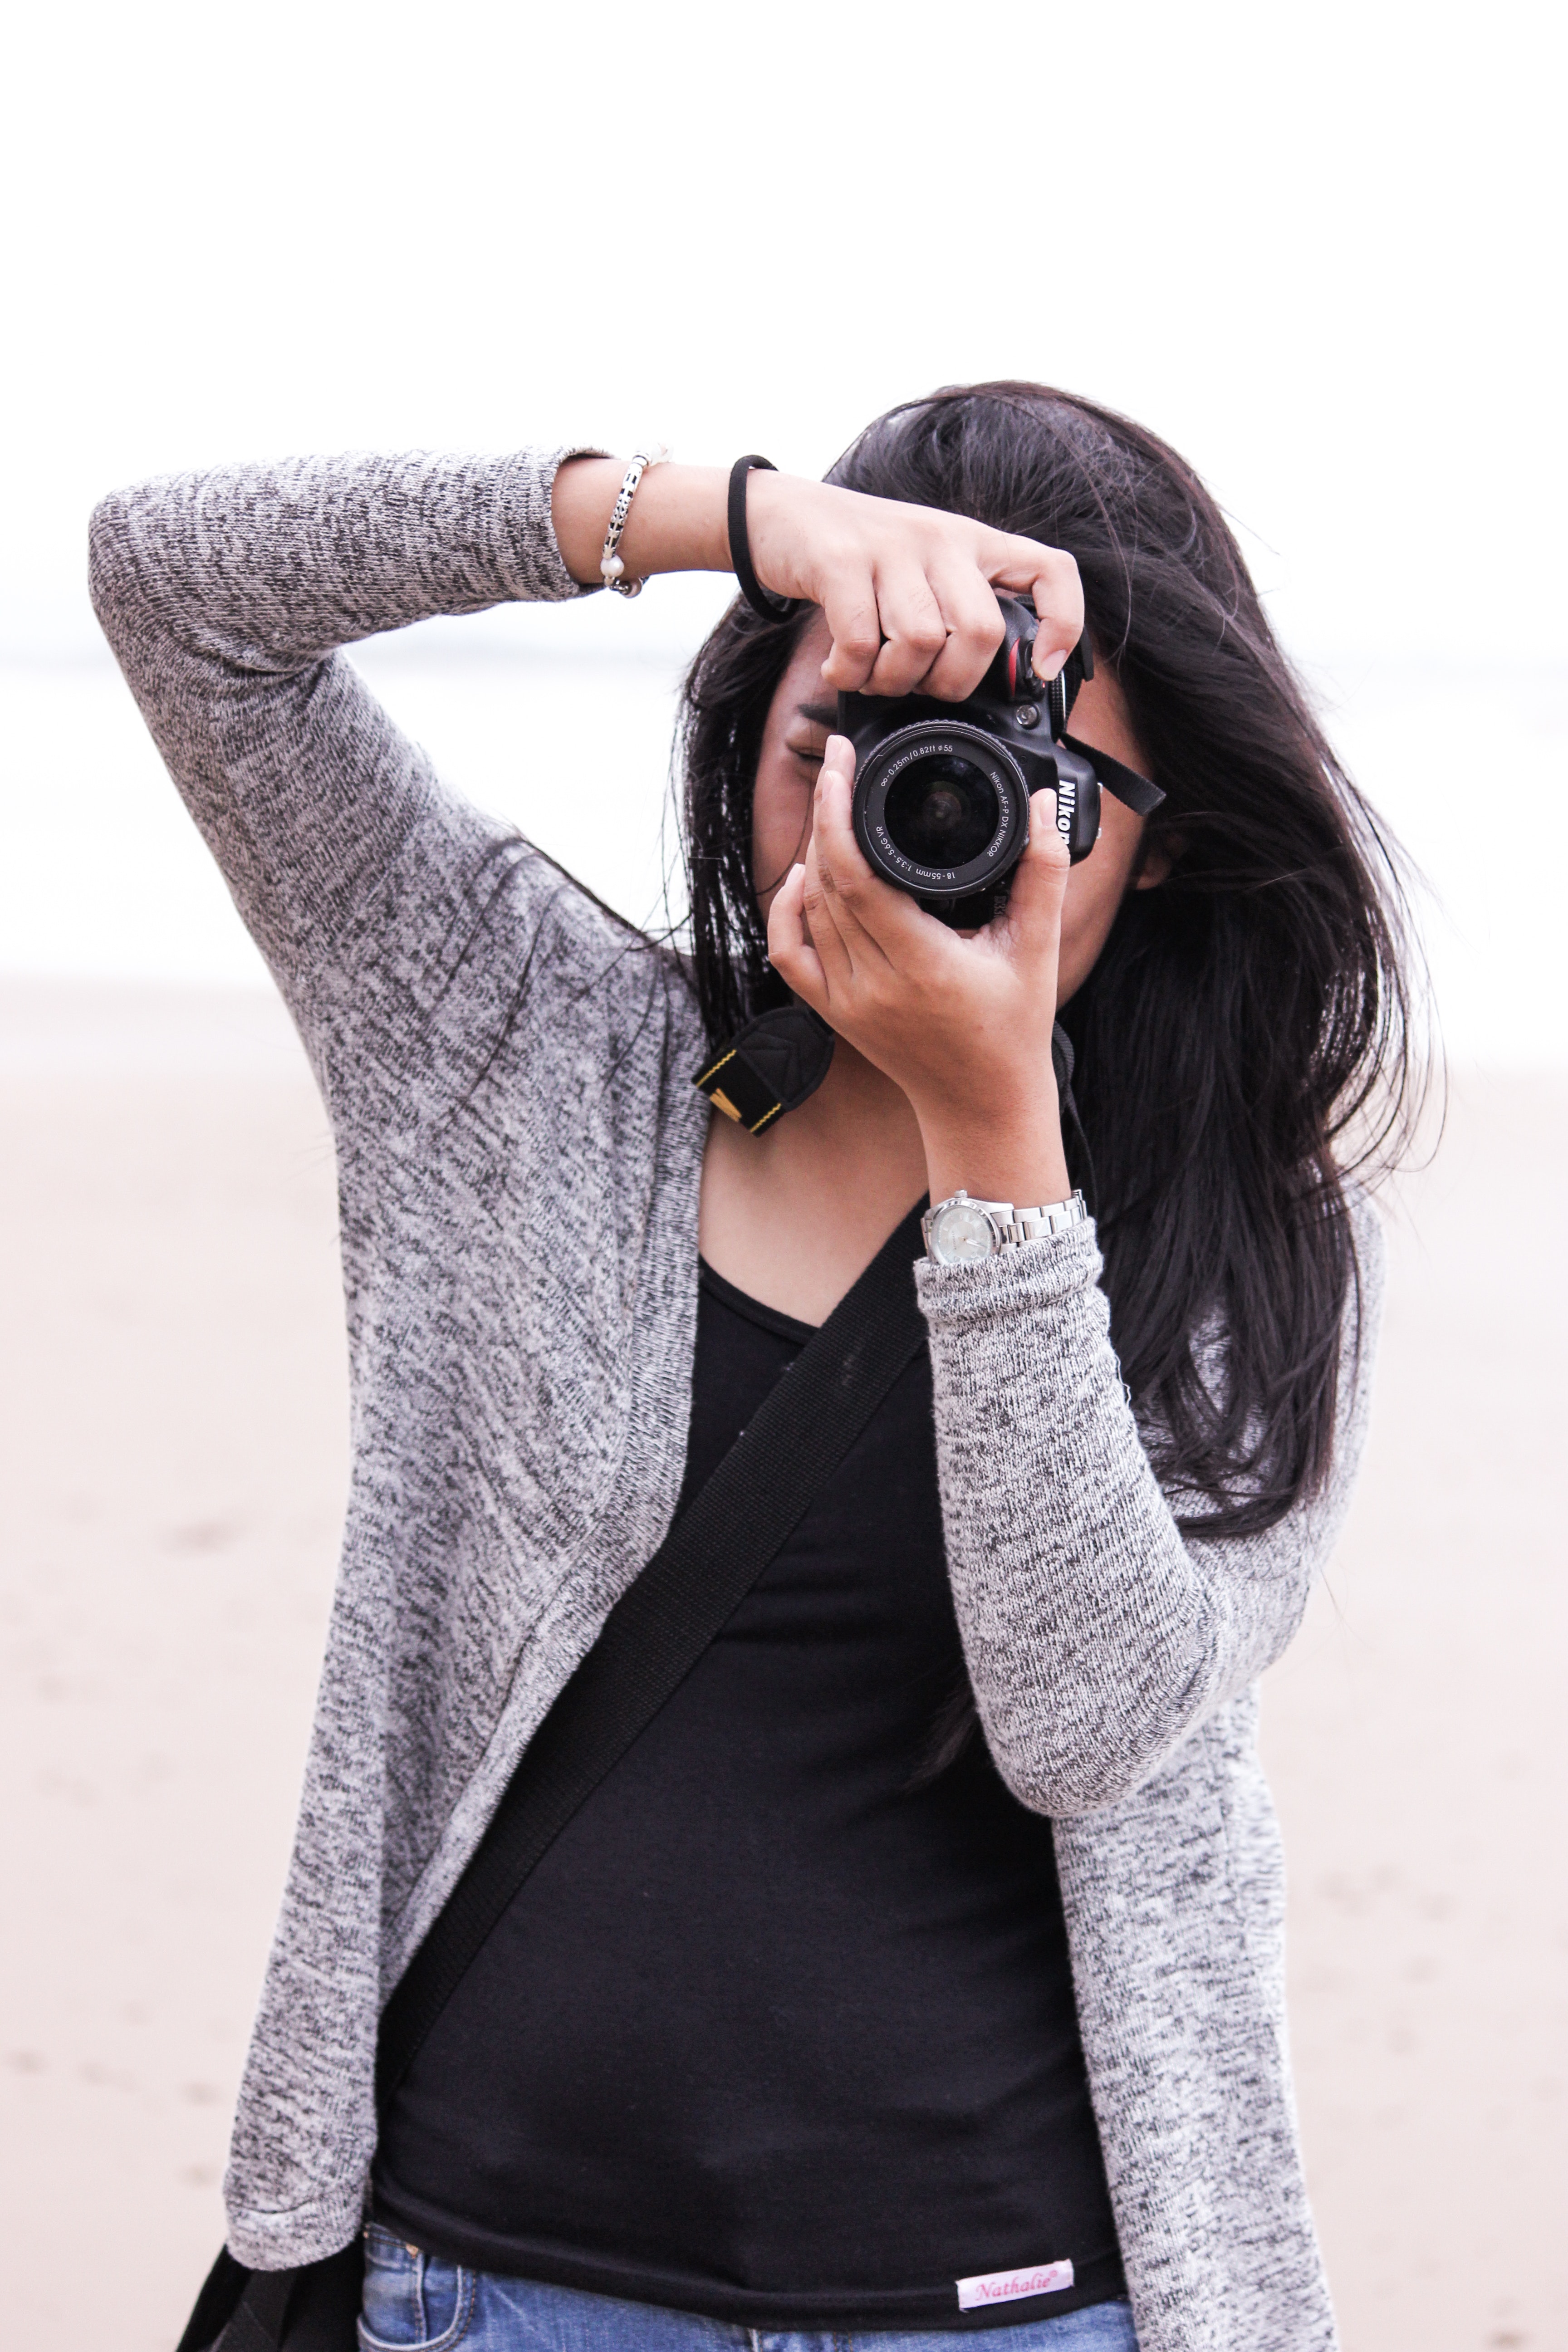 Woman in Gray Cardigan and Black Shirt Holding Black Dslr Camera, Adult, Outfit, Woman, Wear, HQ Photo